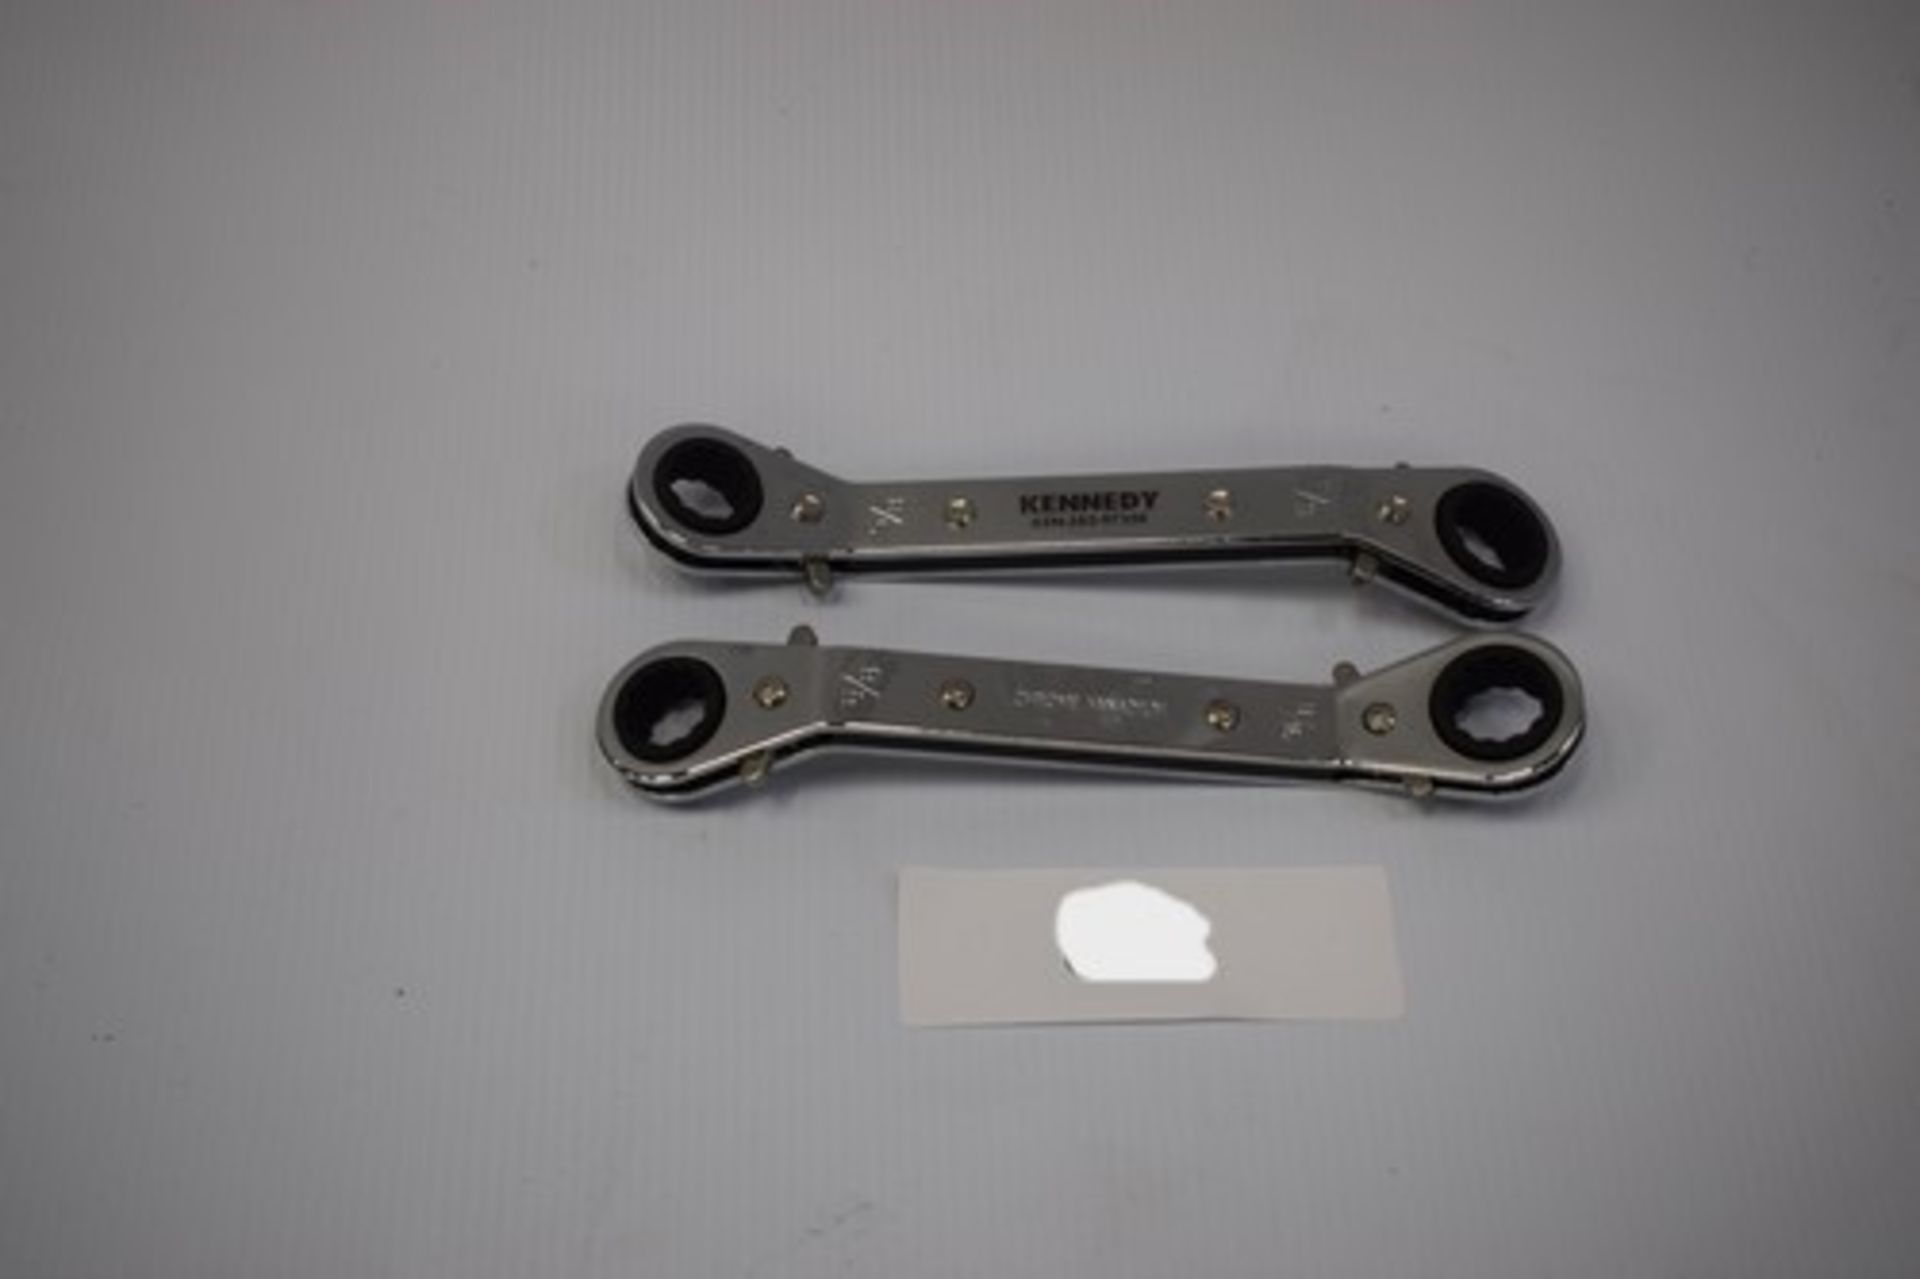 20 x Kennedy double ended ratchet ring spanner, size 5/8" and 11/16" - new (GS0)